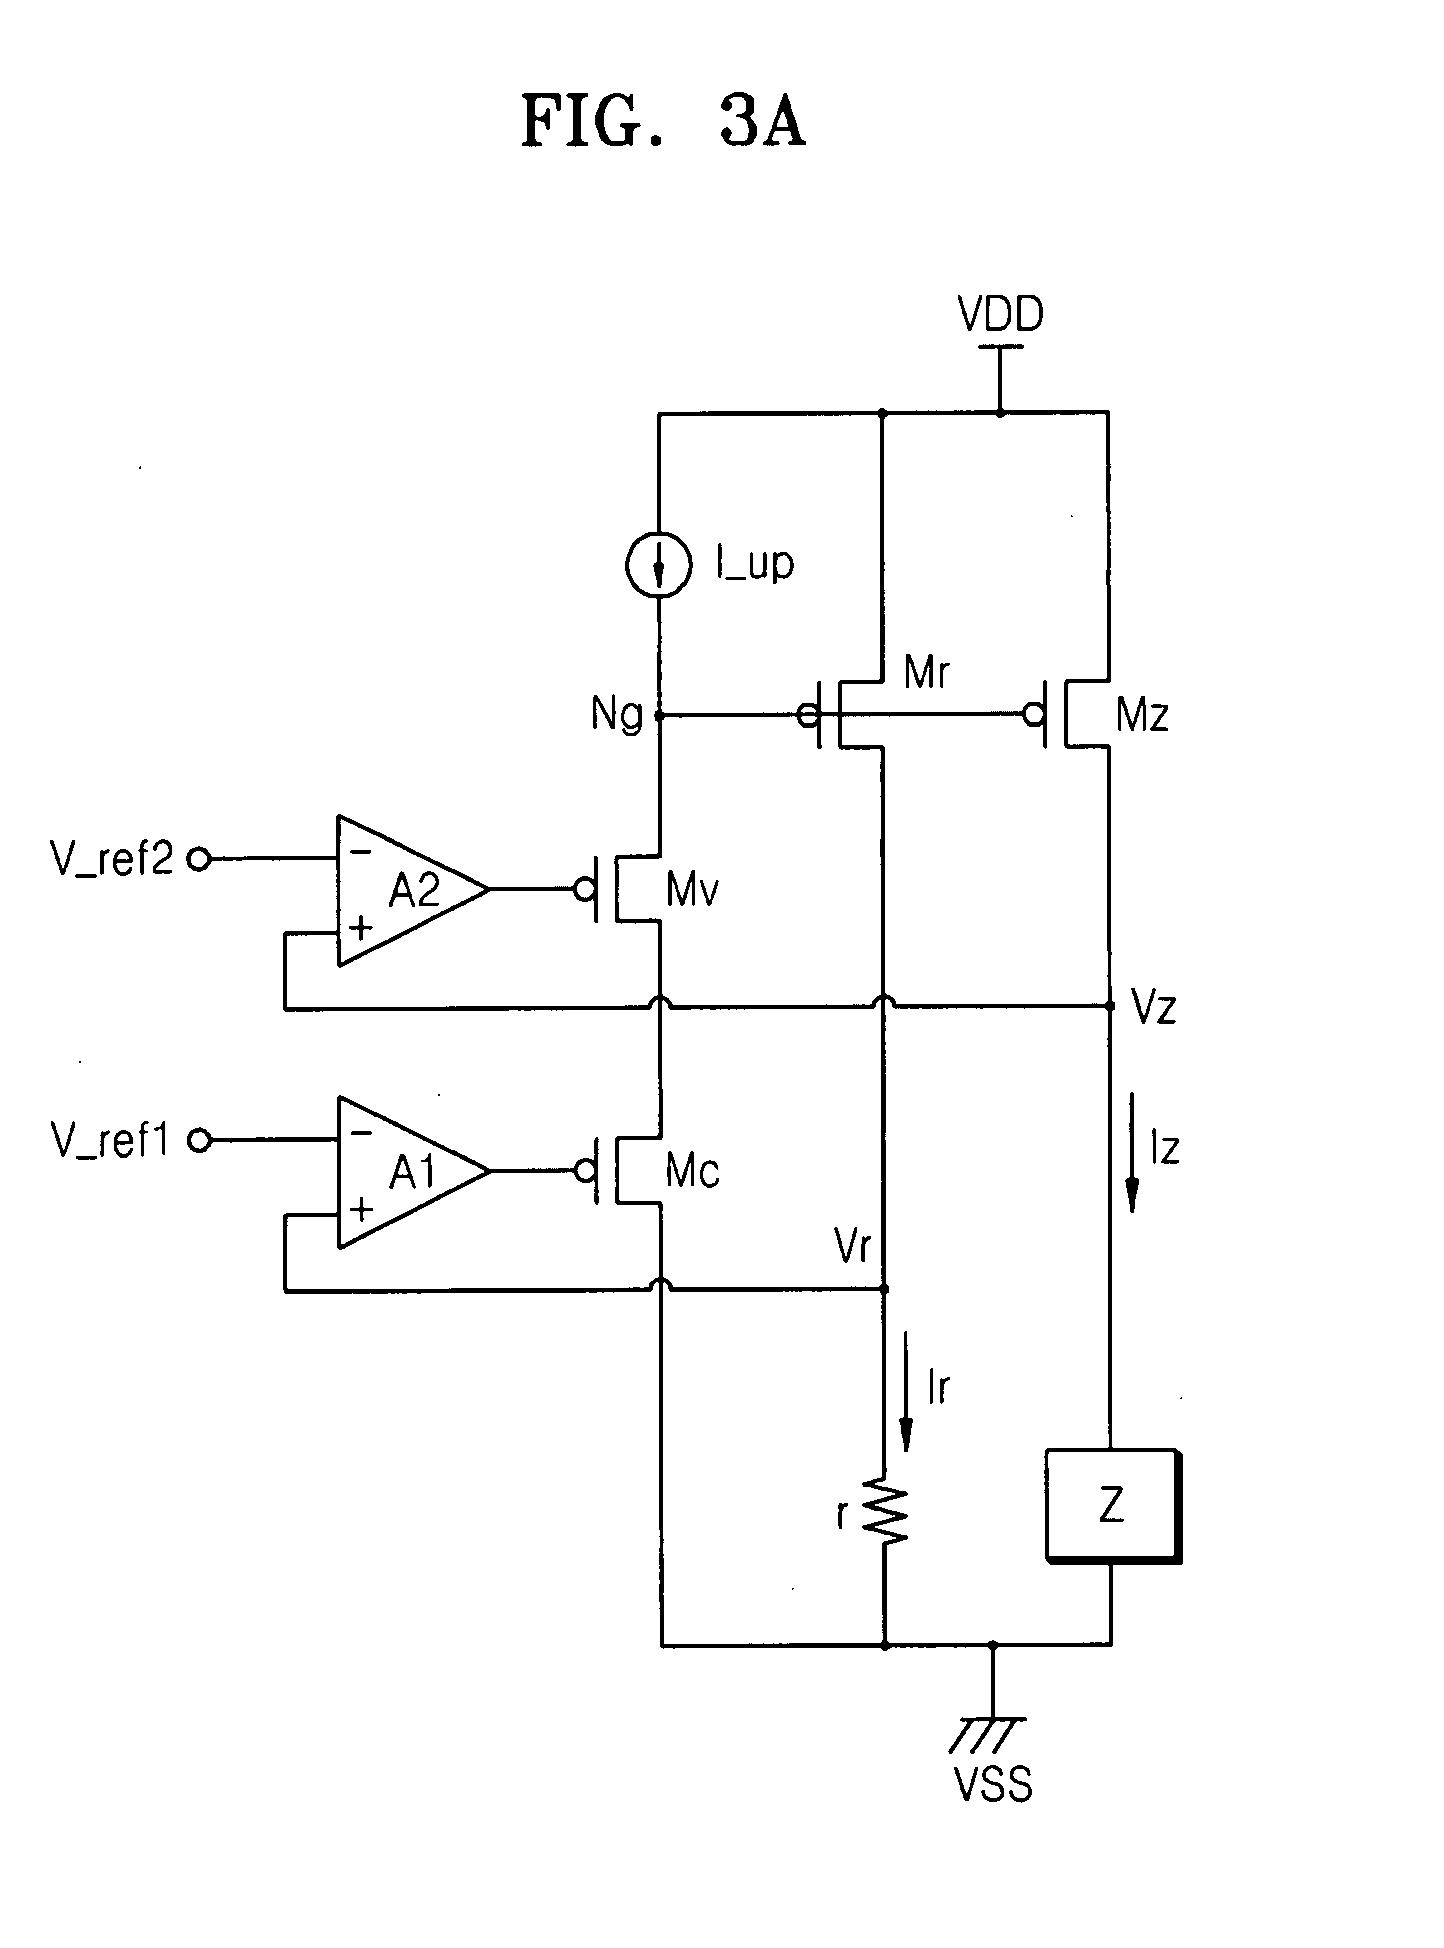 Charging controller for performing constant current and voltage modes